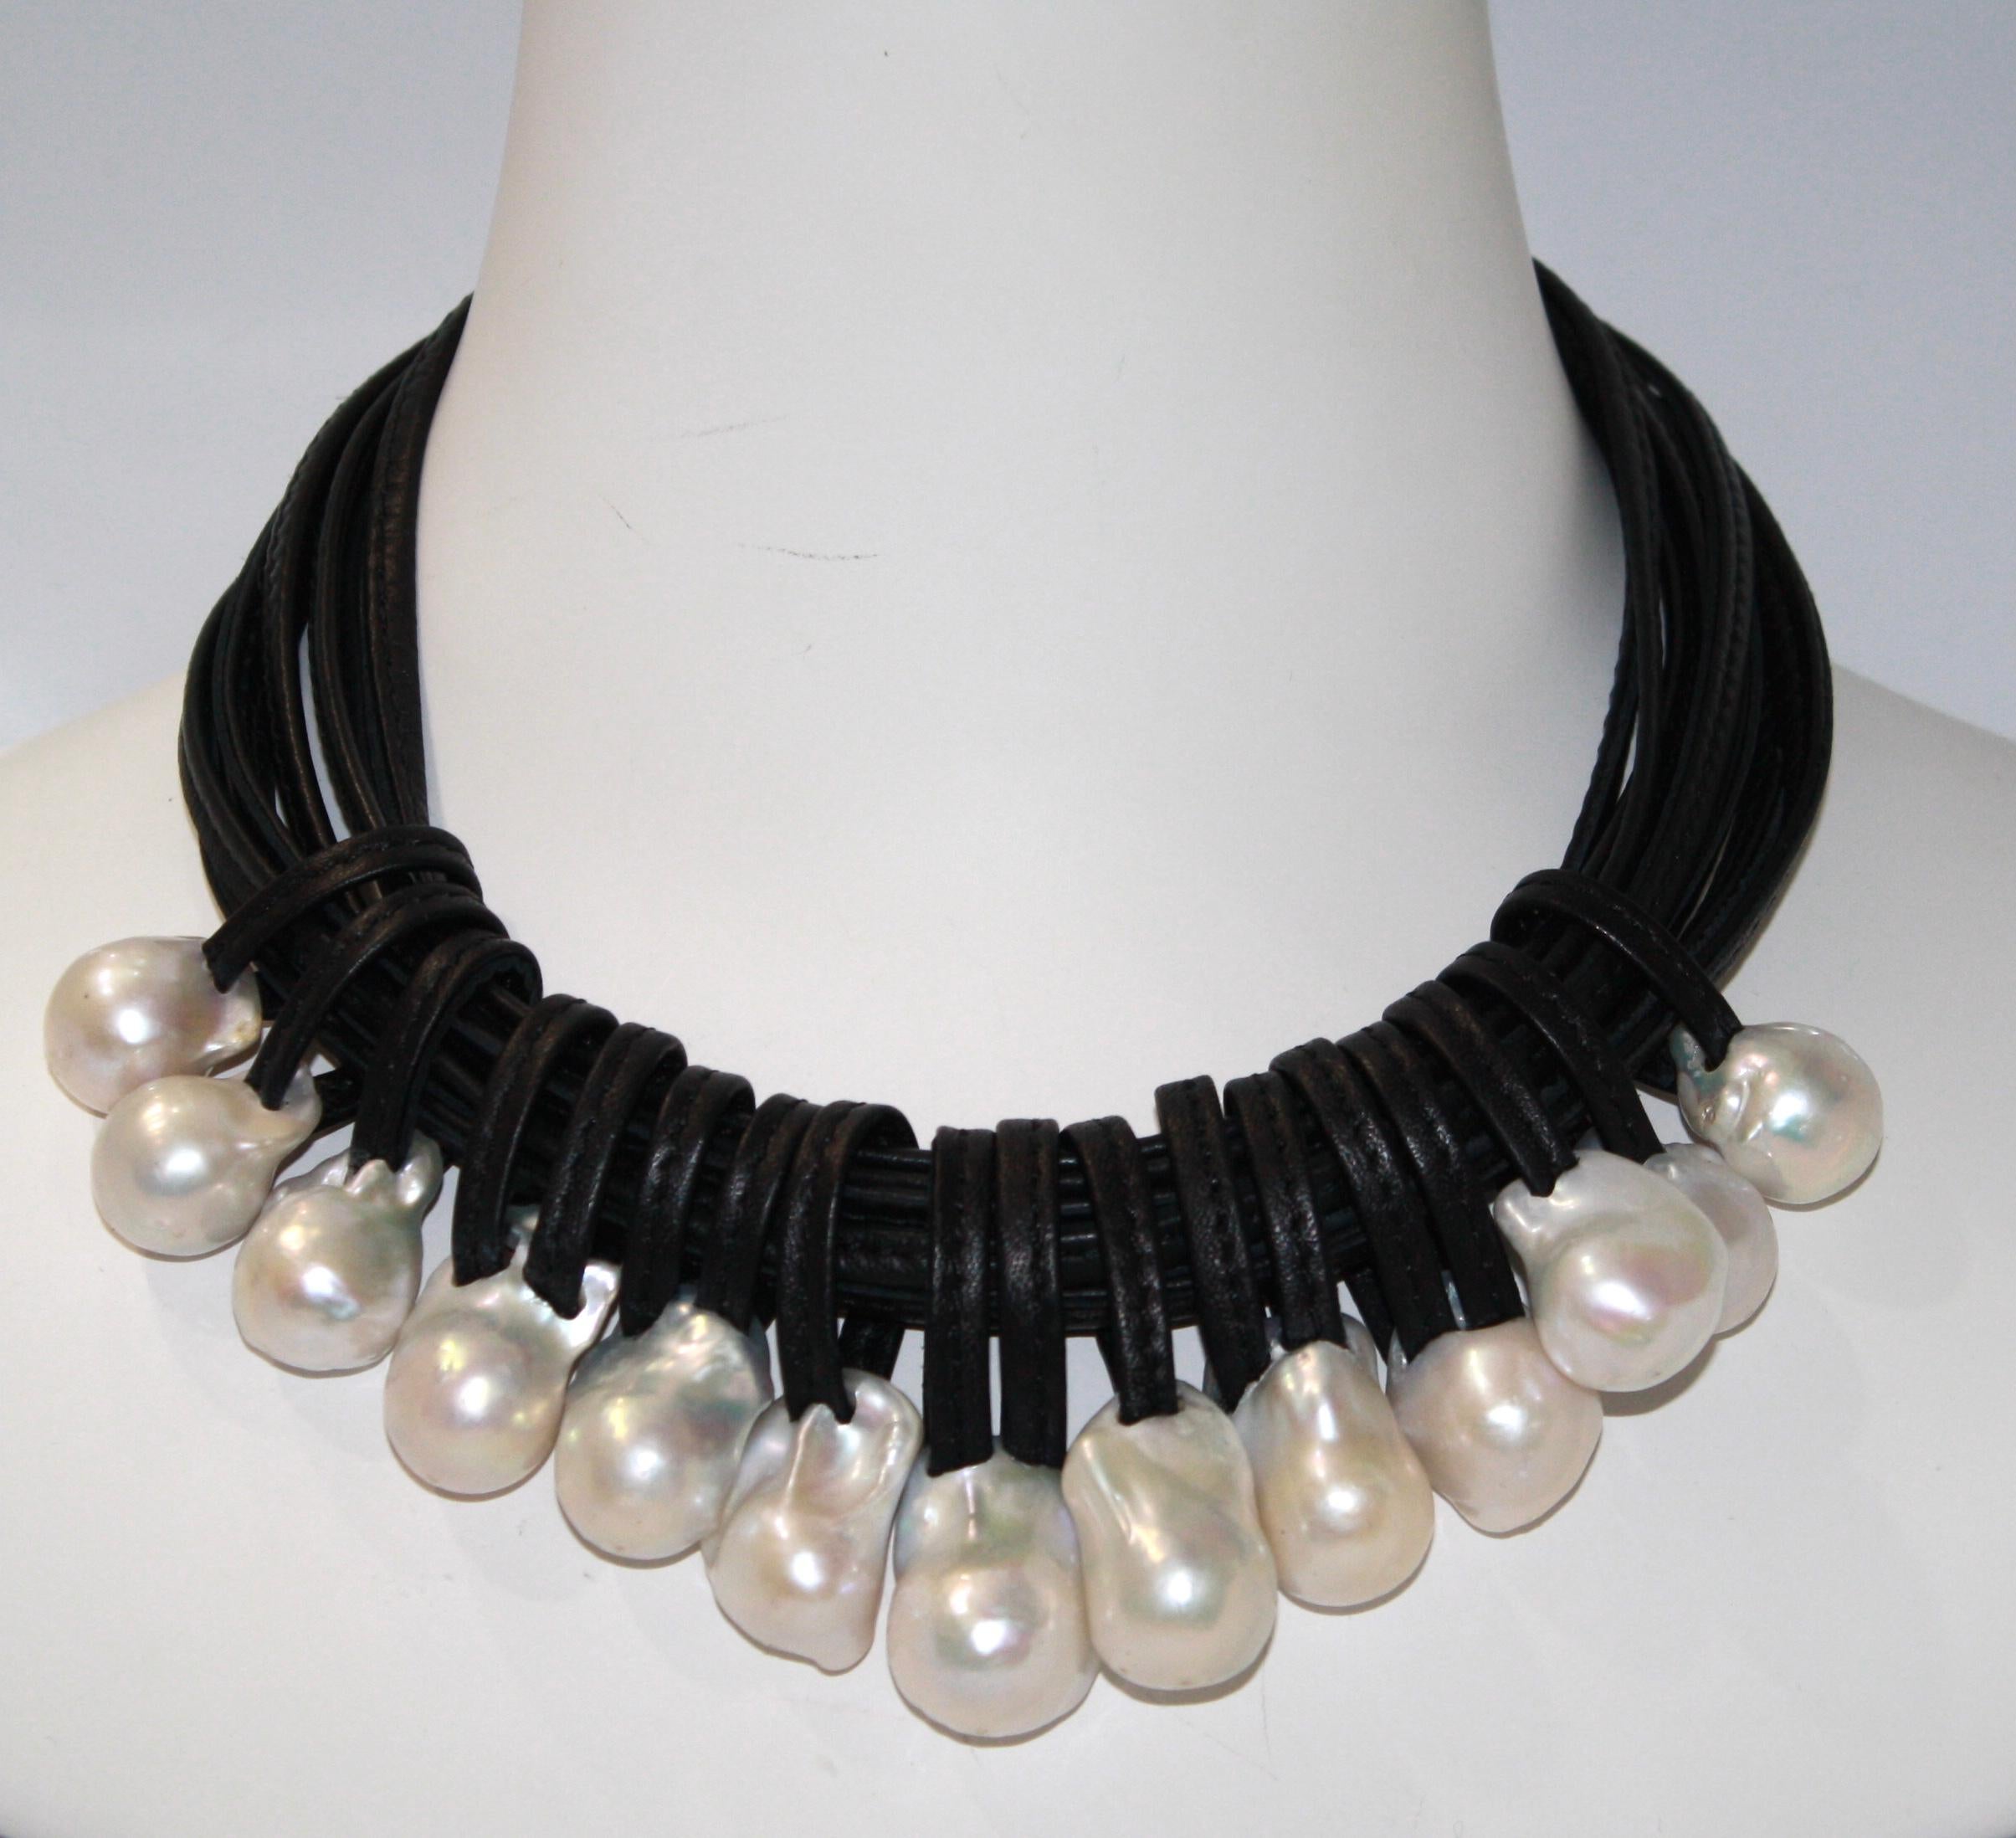 Monies One of a Kind Leather and Freshwater Baroque Pearl Necklace.